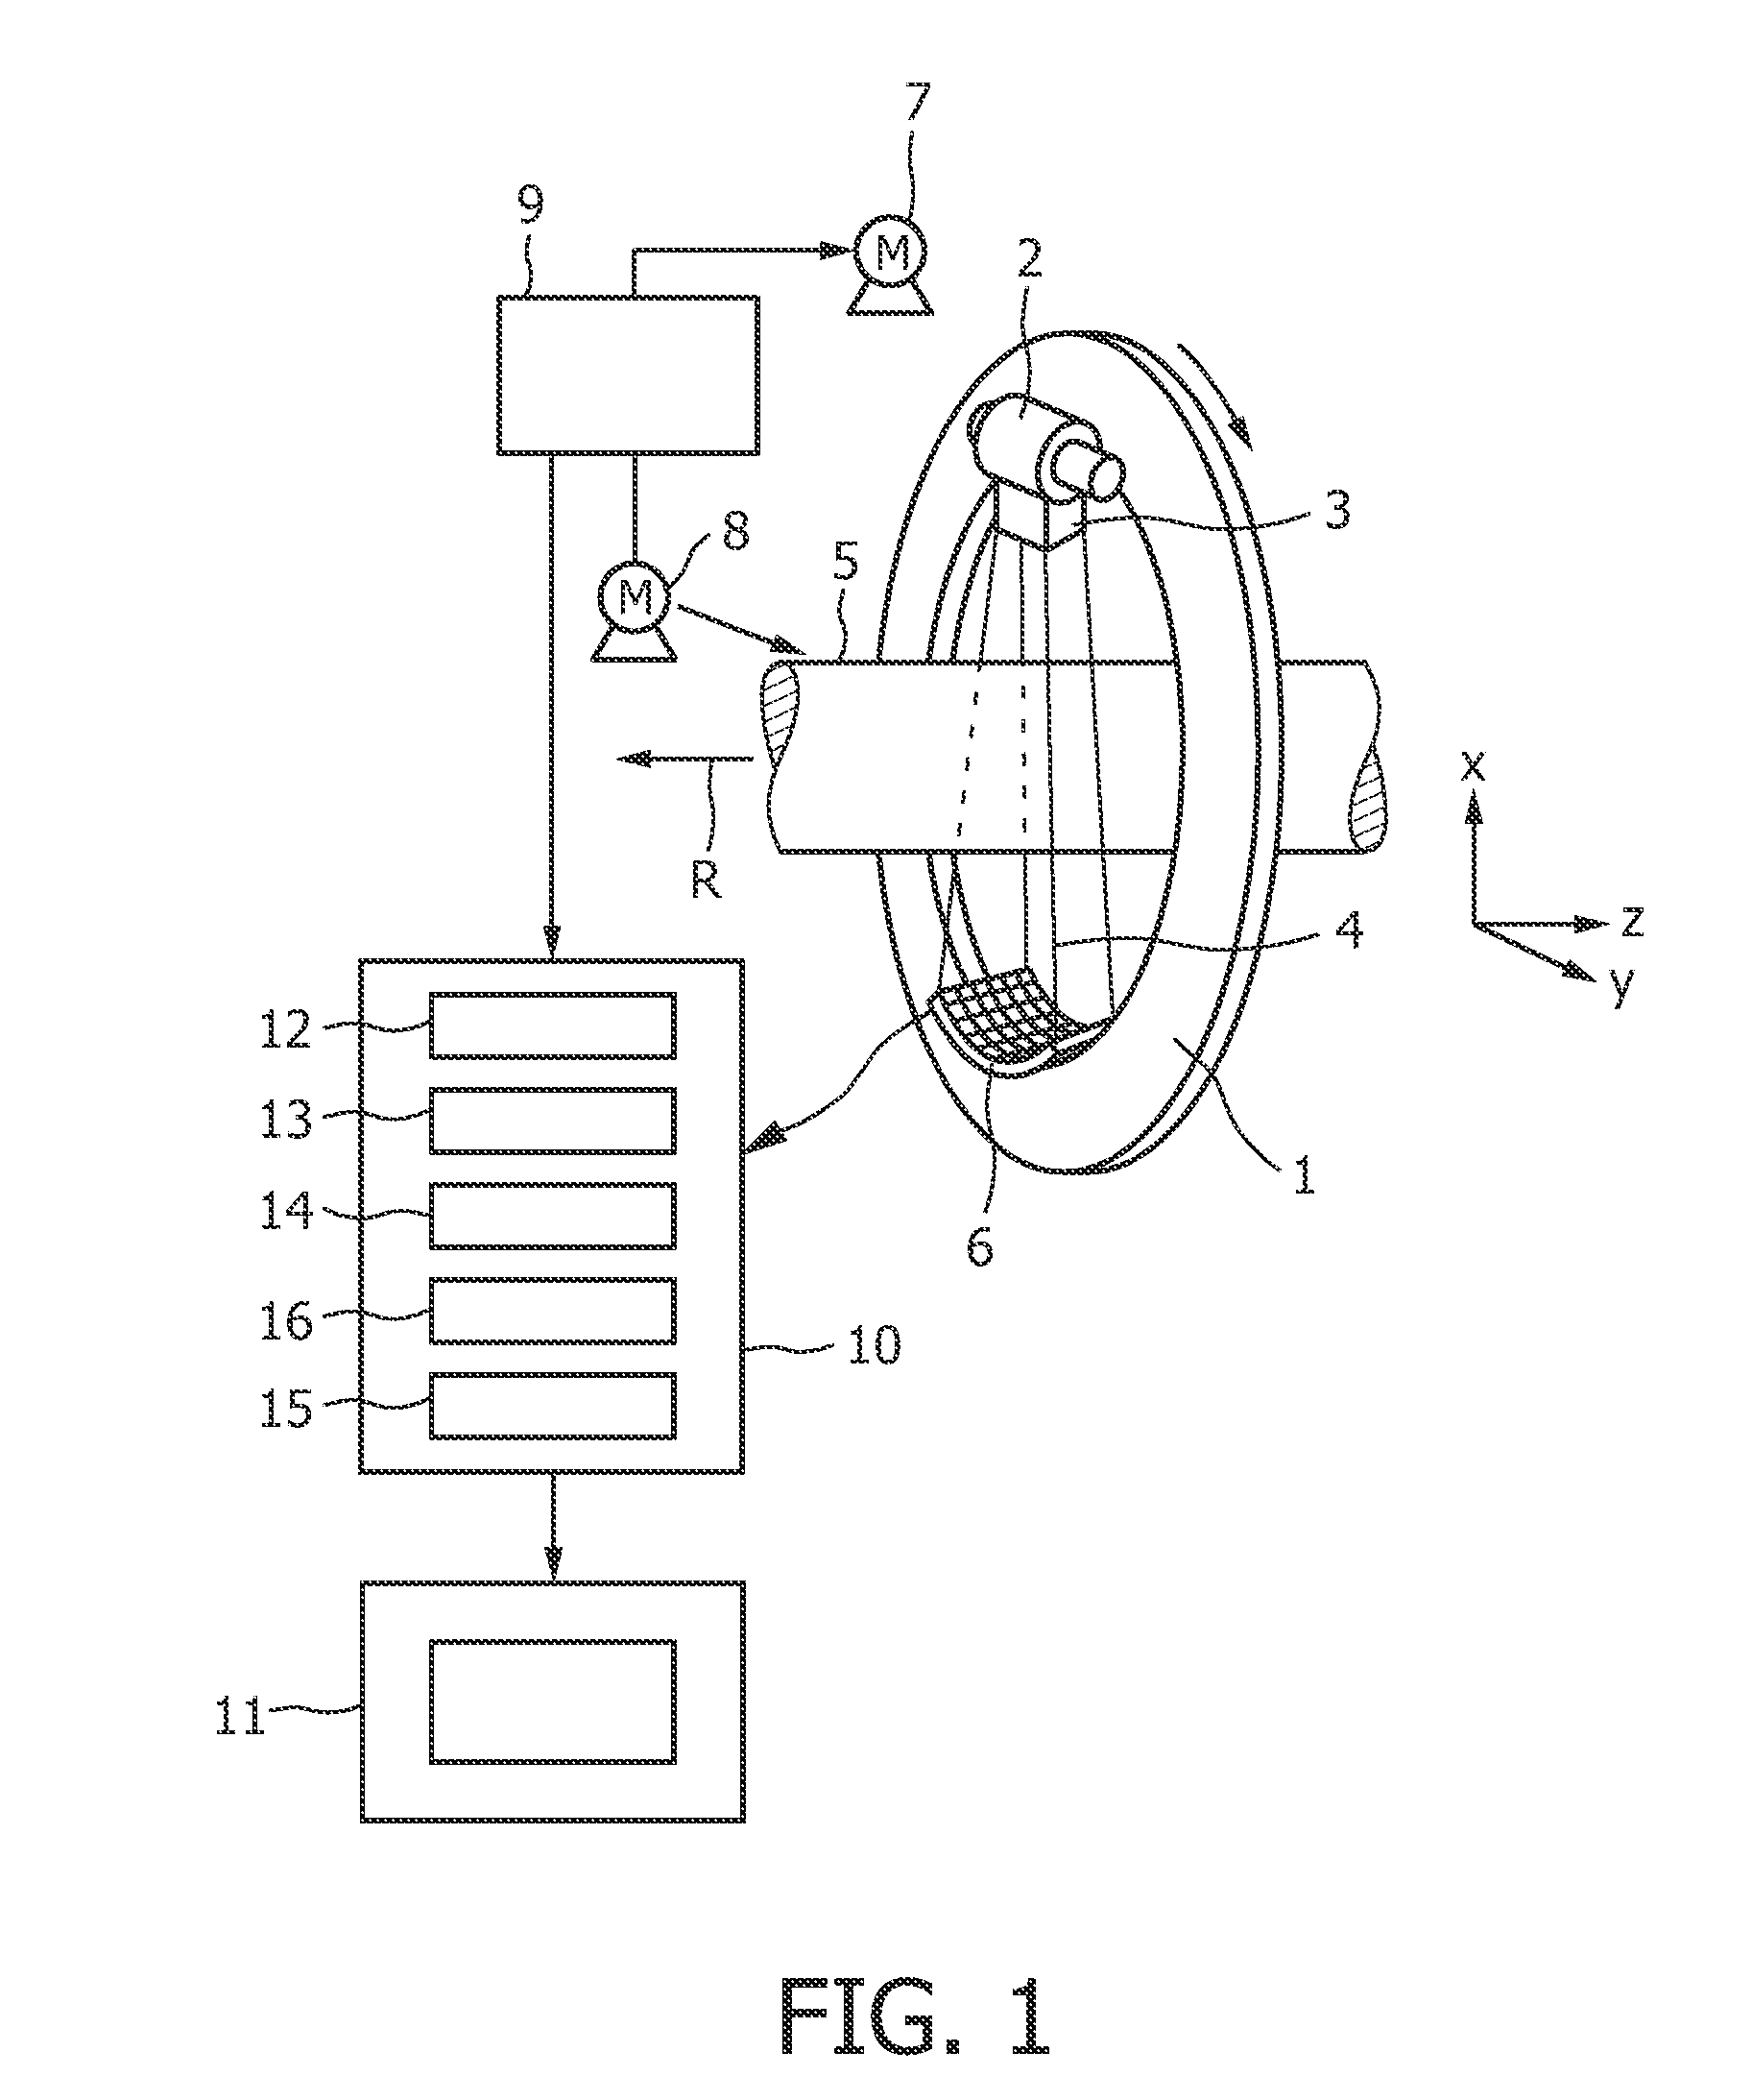 Imaging apparatus for generating an image of a region of interest